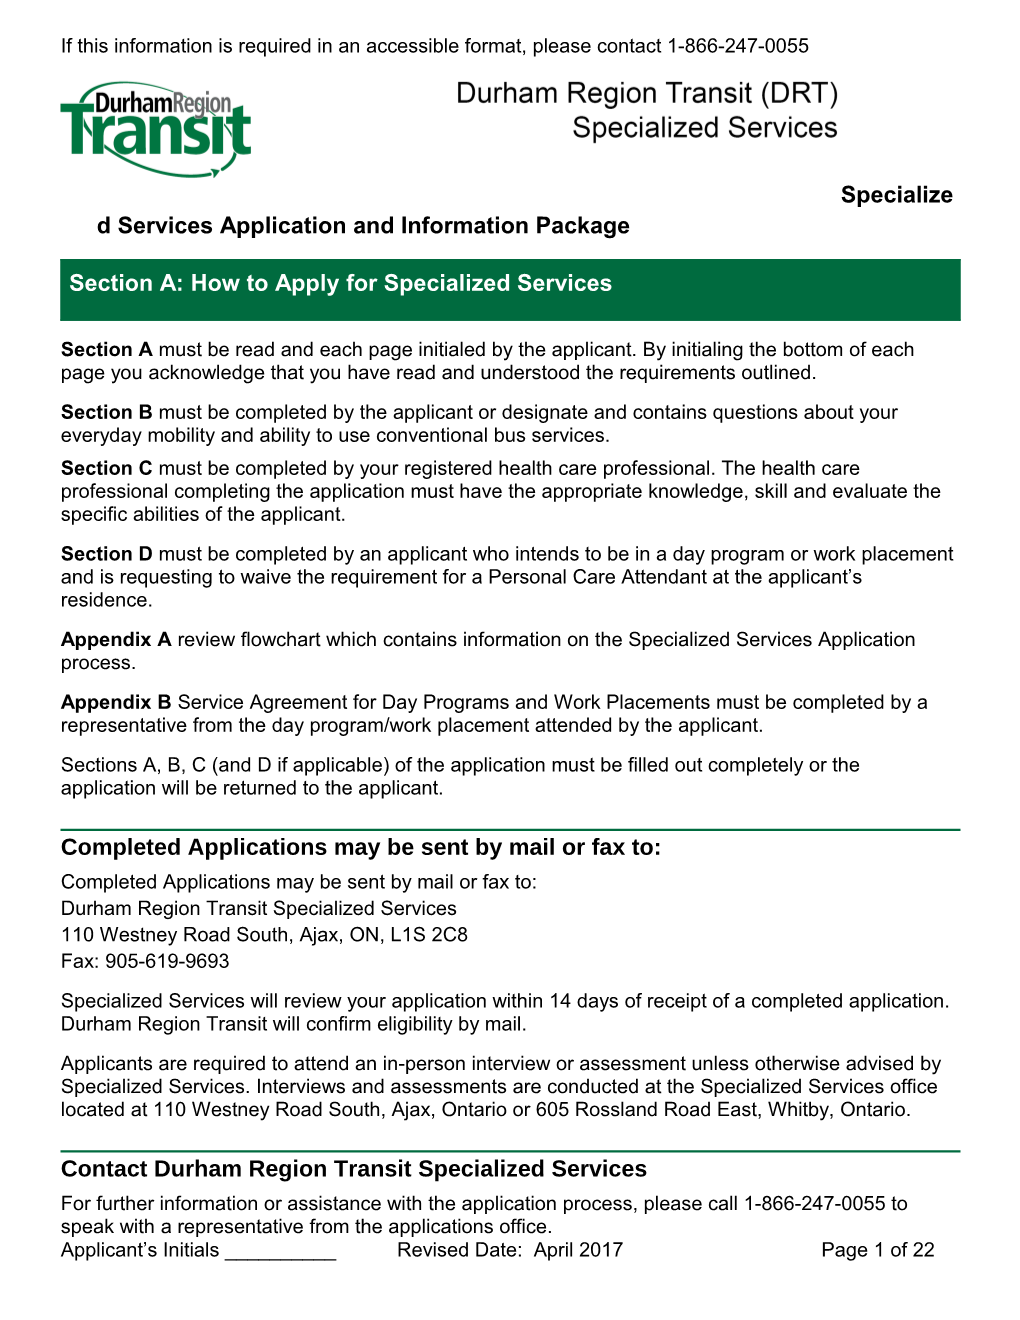 Specialized Services Application and Information Package